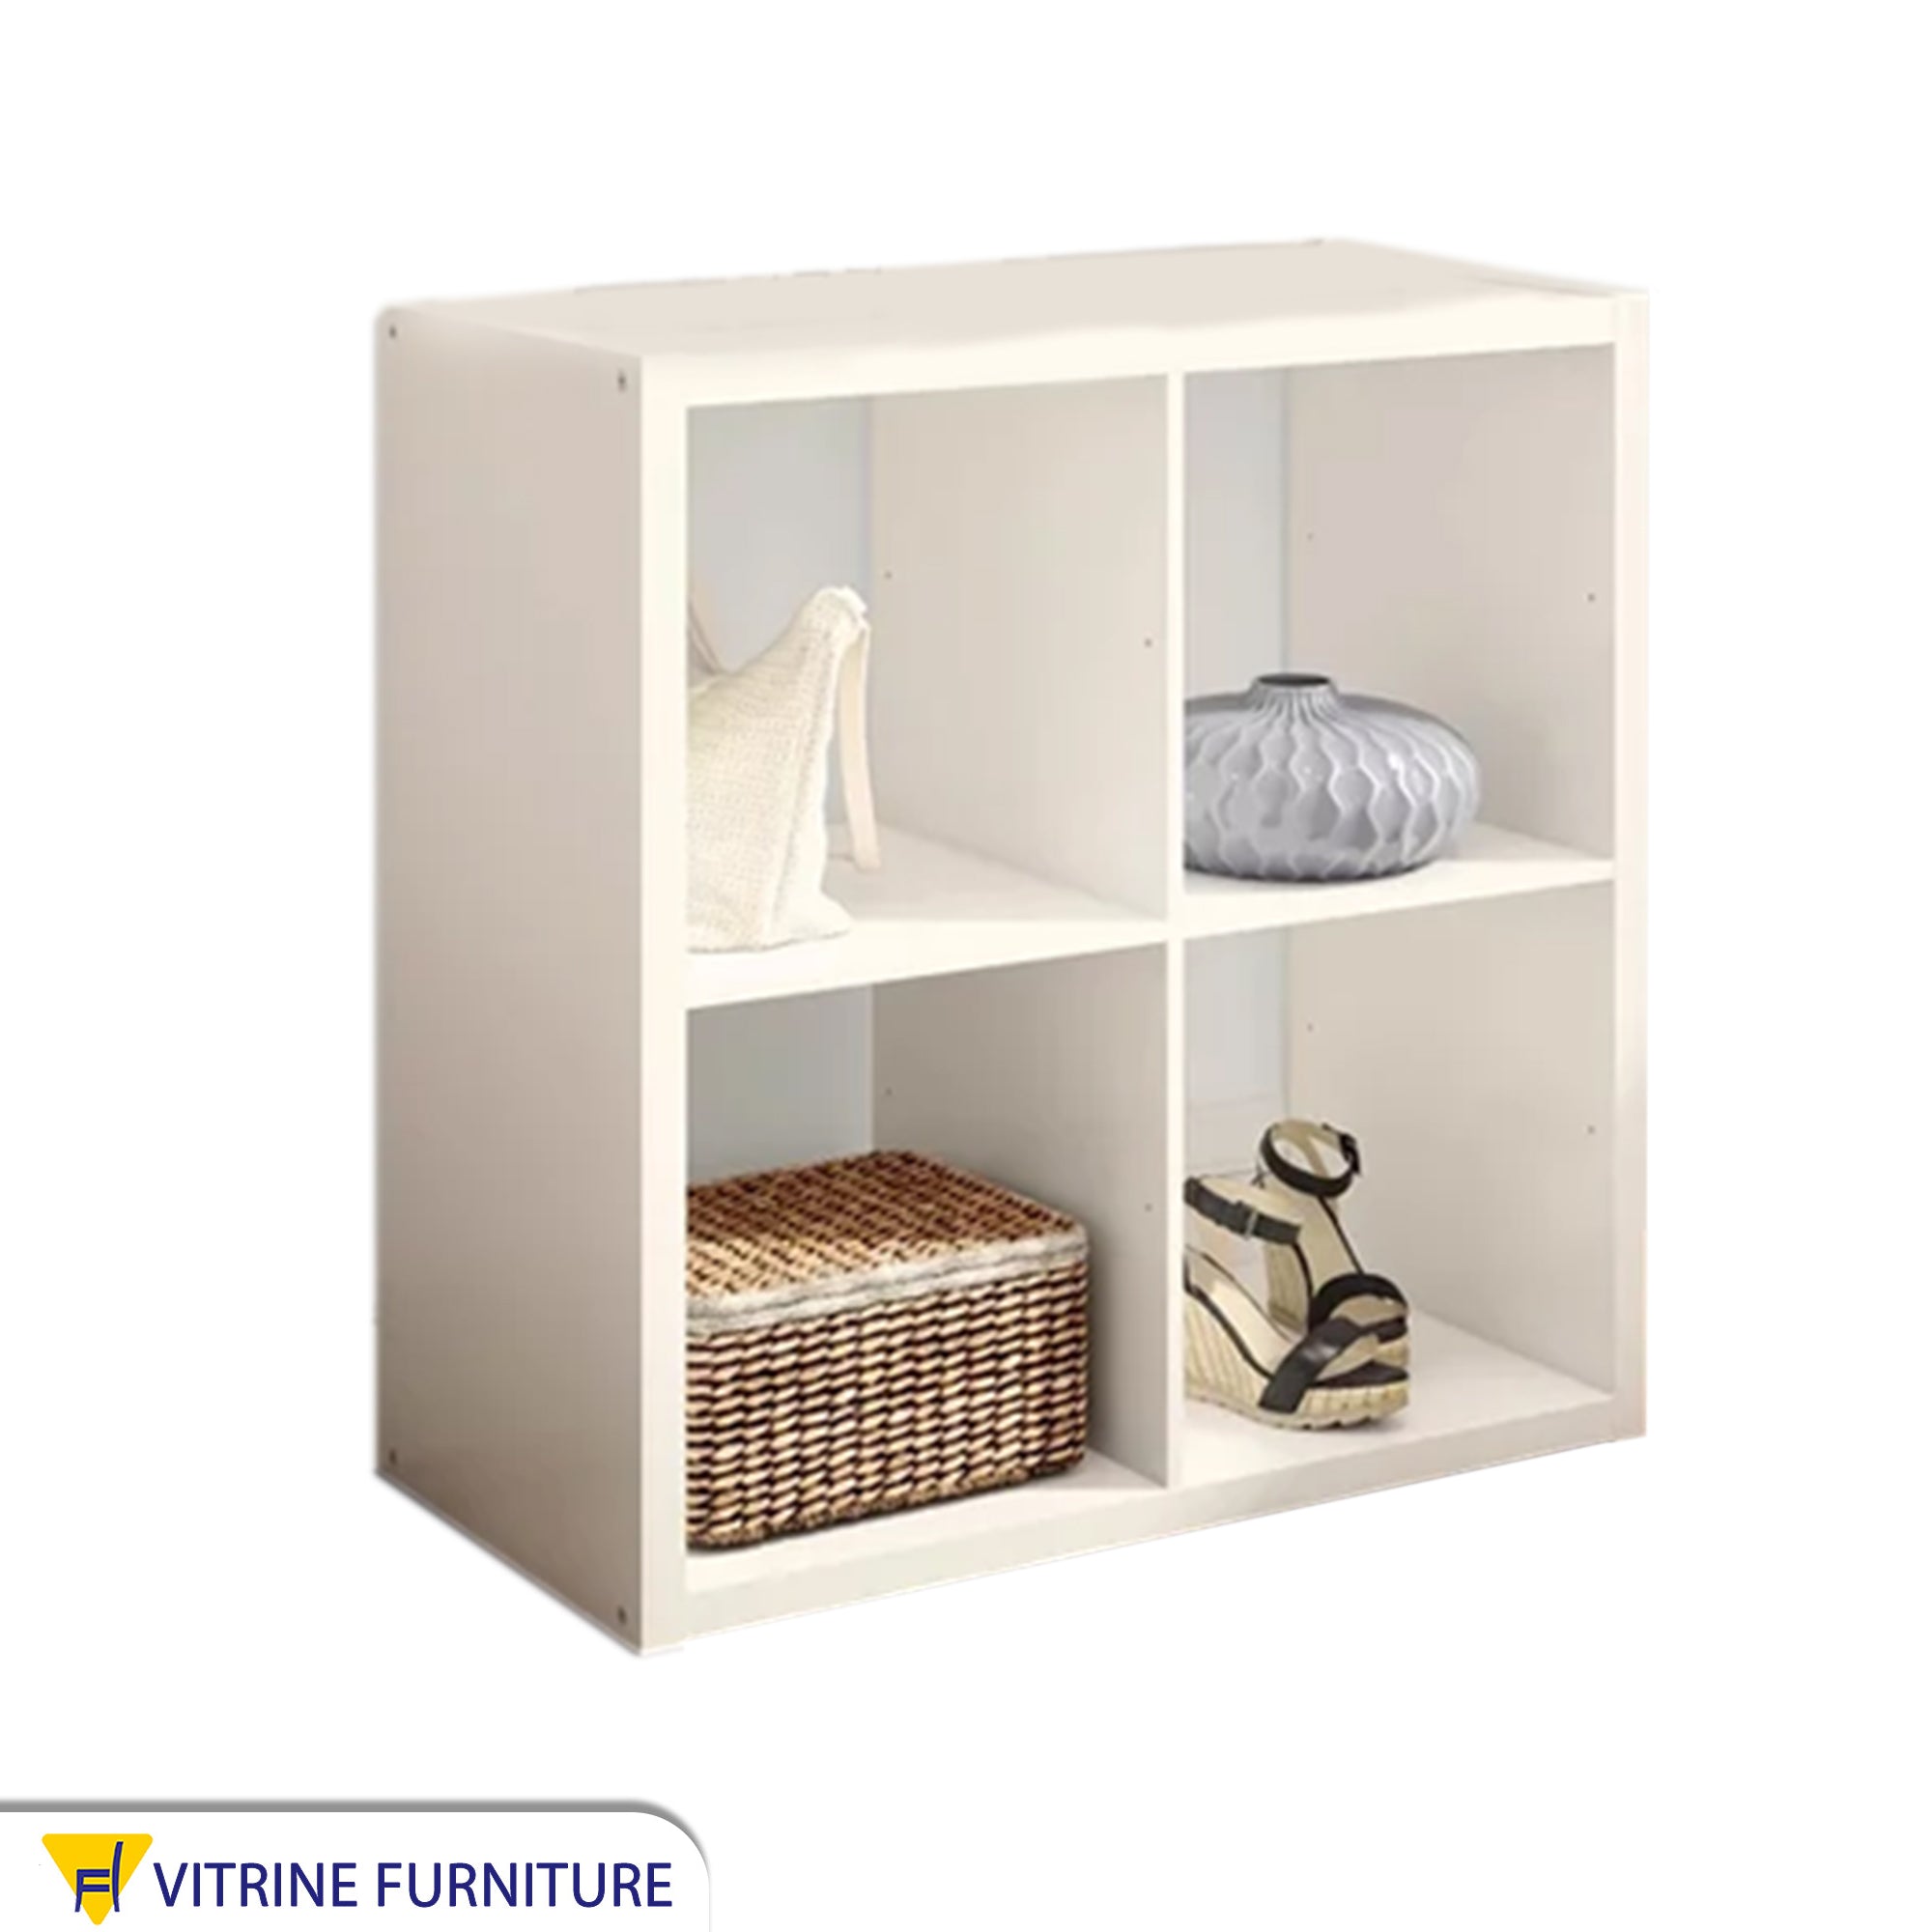 A small decorative piece for divided shelves in white